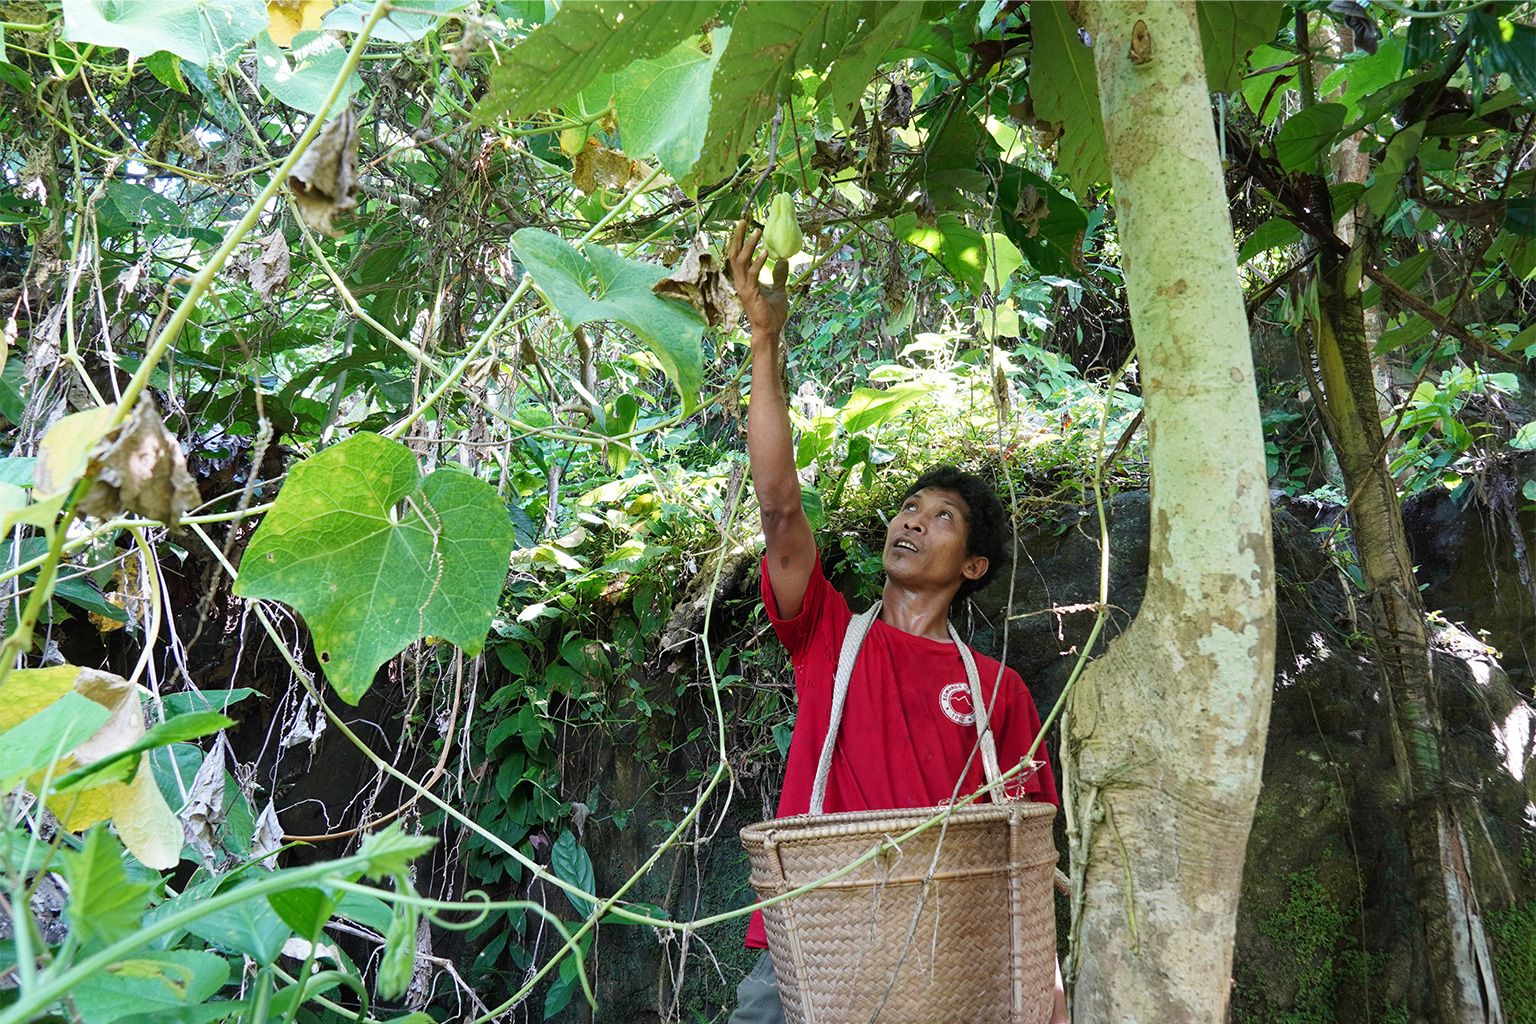 Posito Daom cultivates and harvests chayote without using chemicals, selling the produce to meet household needs and support his children's education.